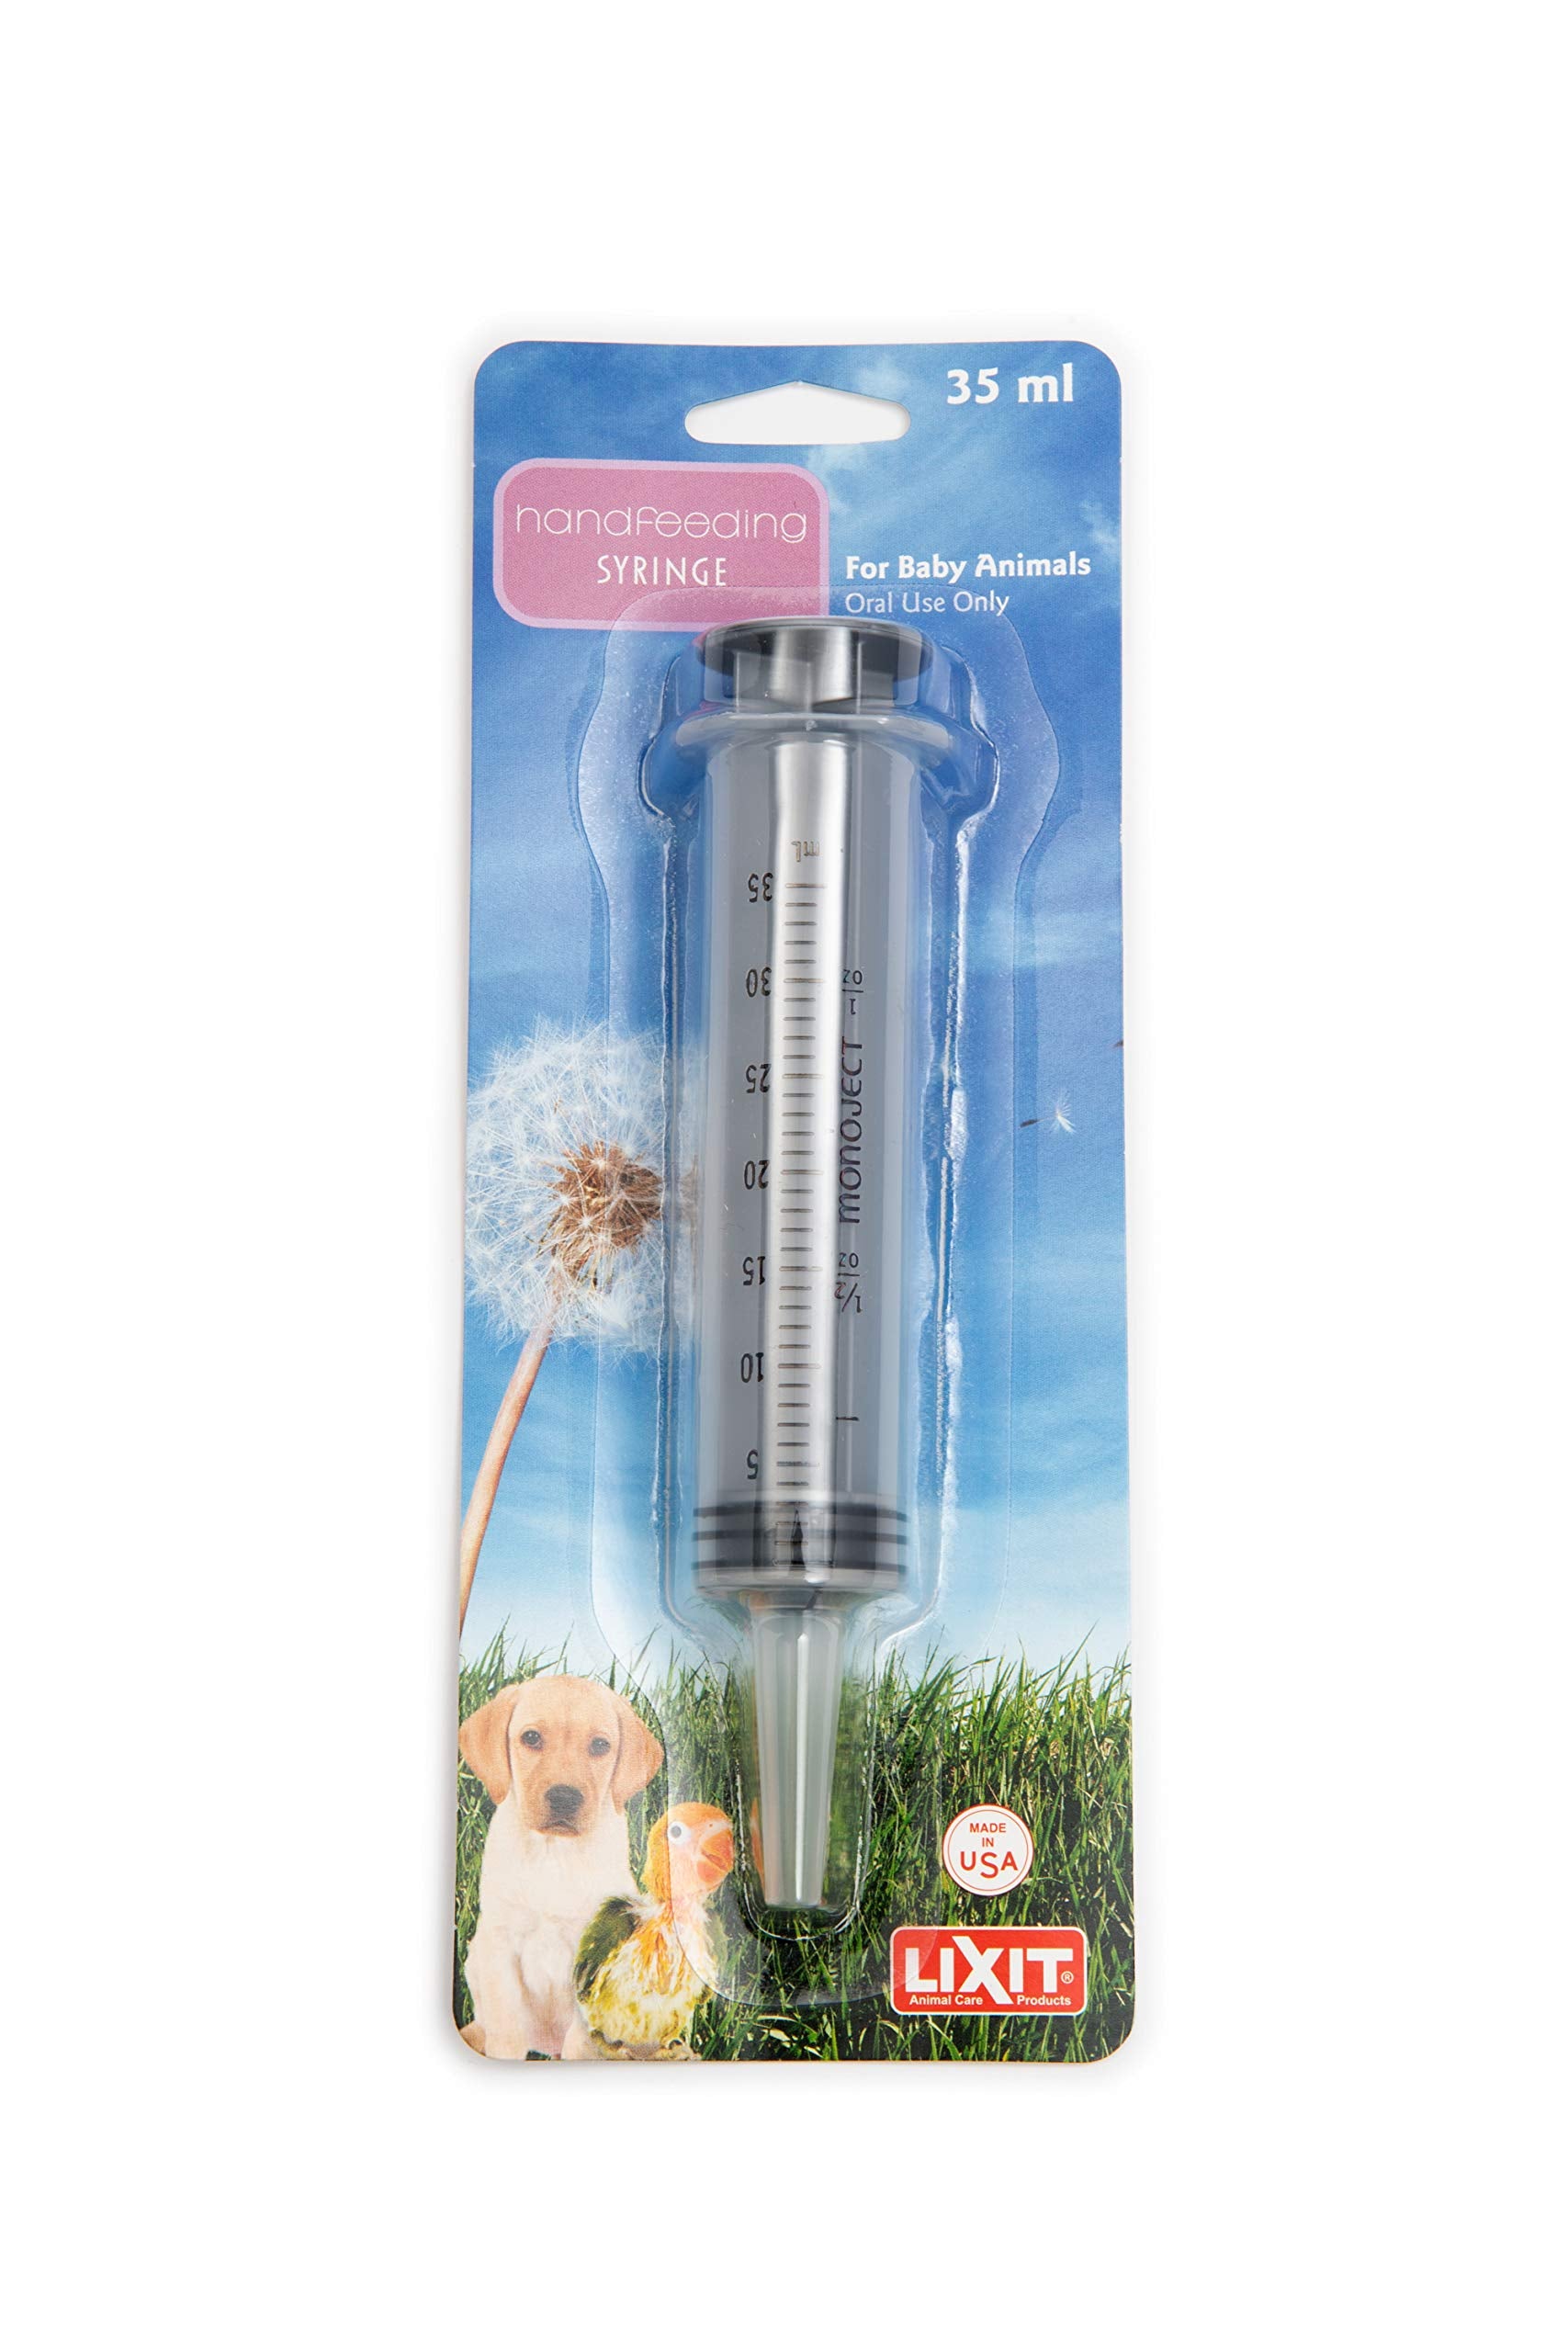 Lixit Hand Feeding Syringes for Puppies, Kittens, Rabbits and Other Baby Animals (35ML Pack of 6)